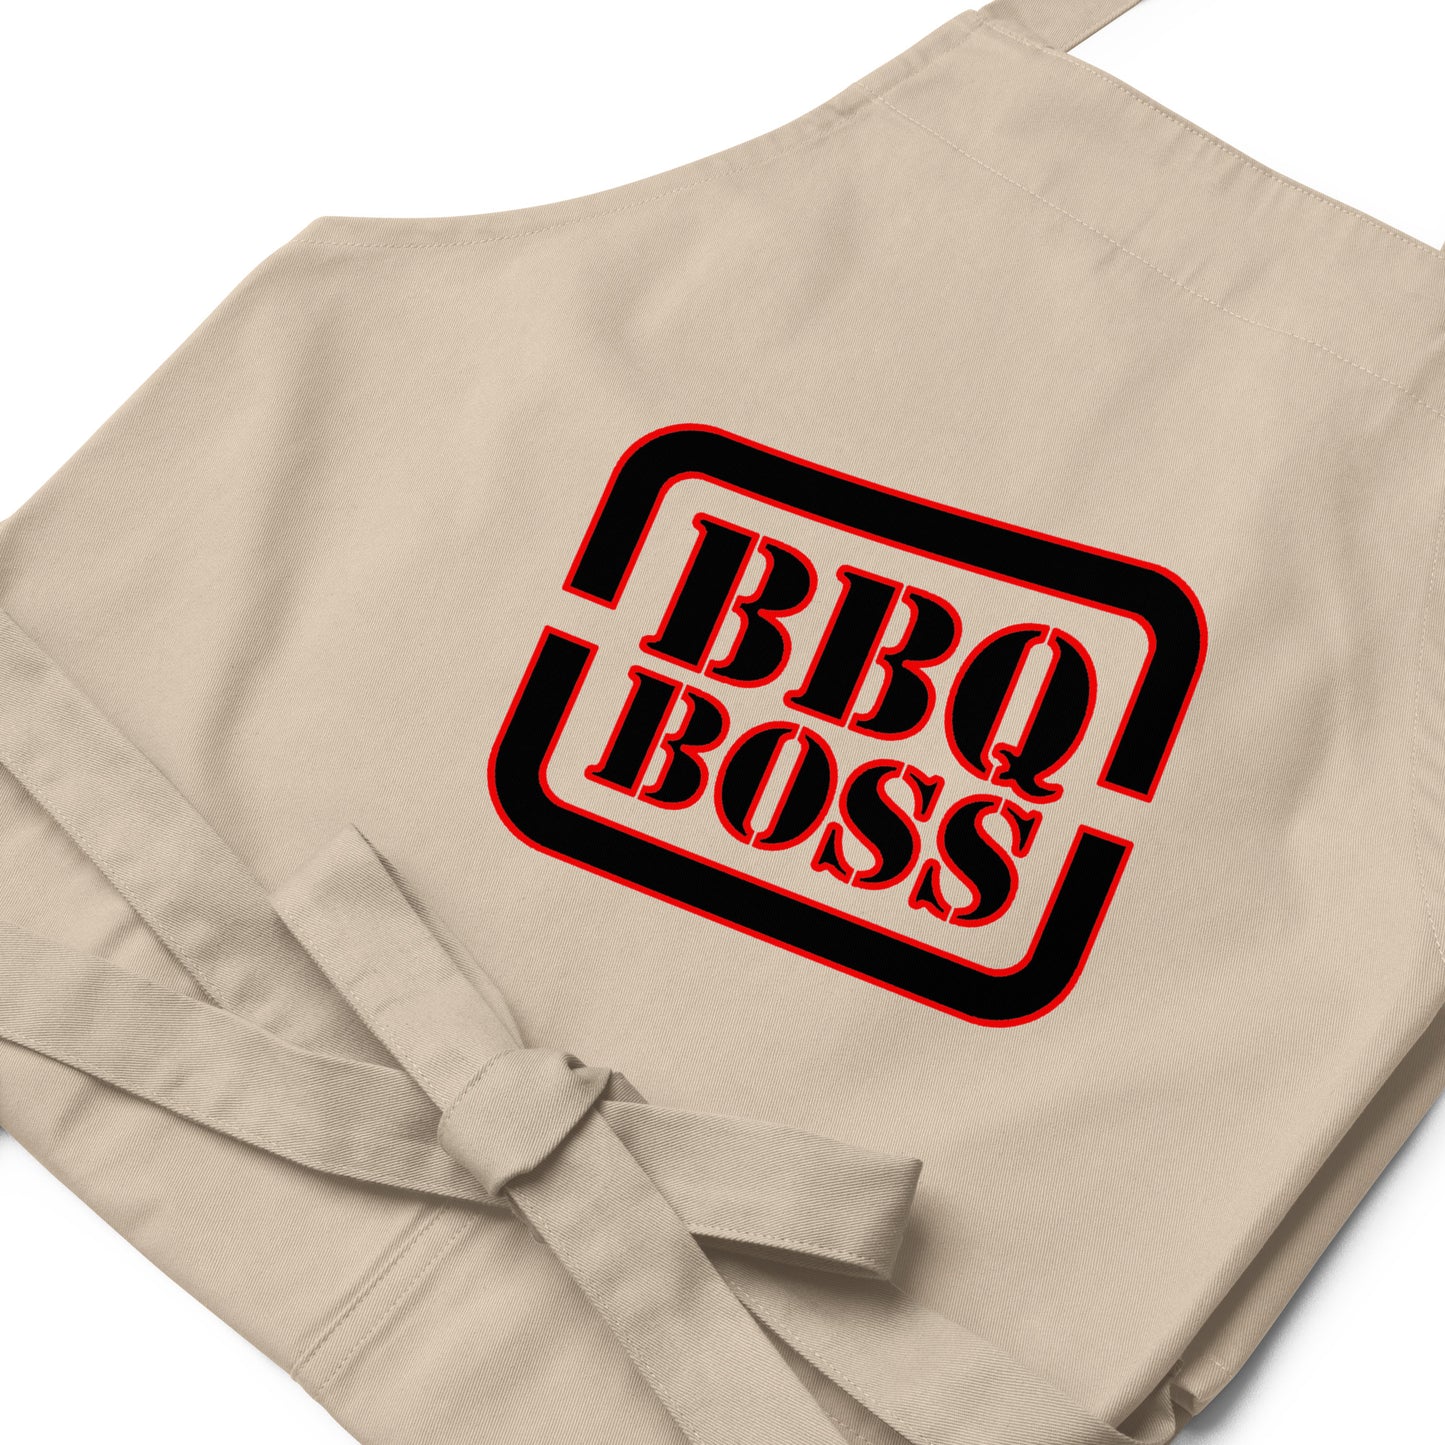 rope apron with text "BBQ BOSS"